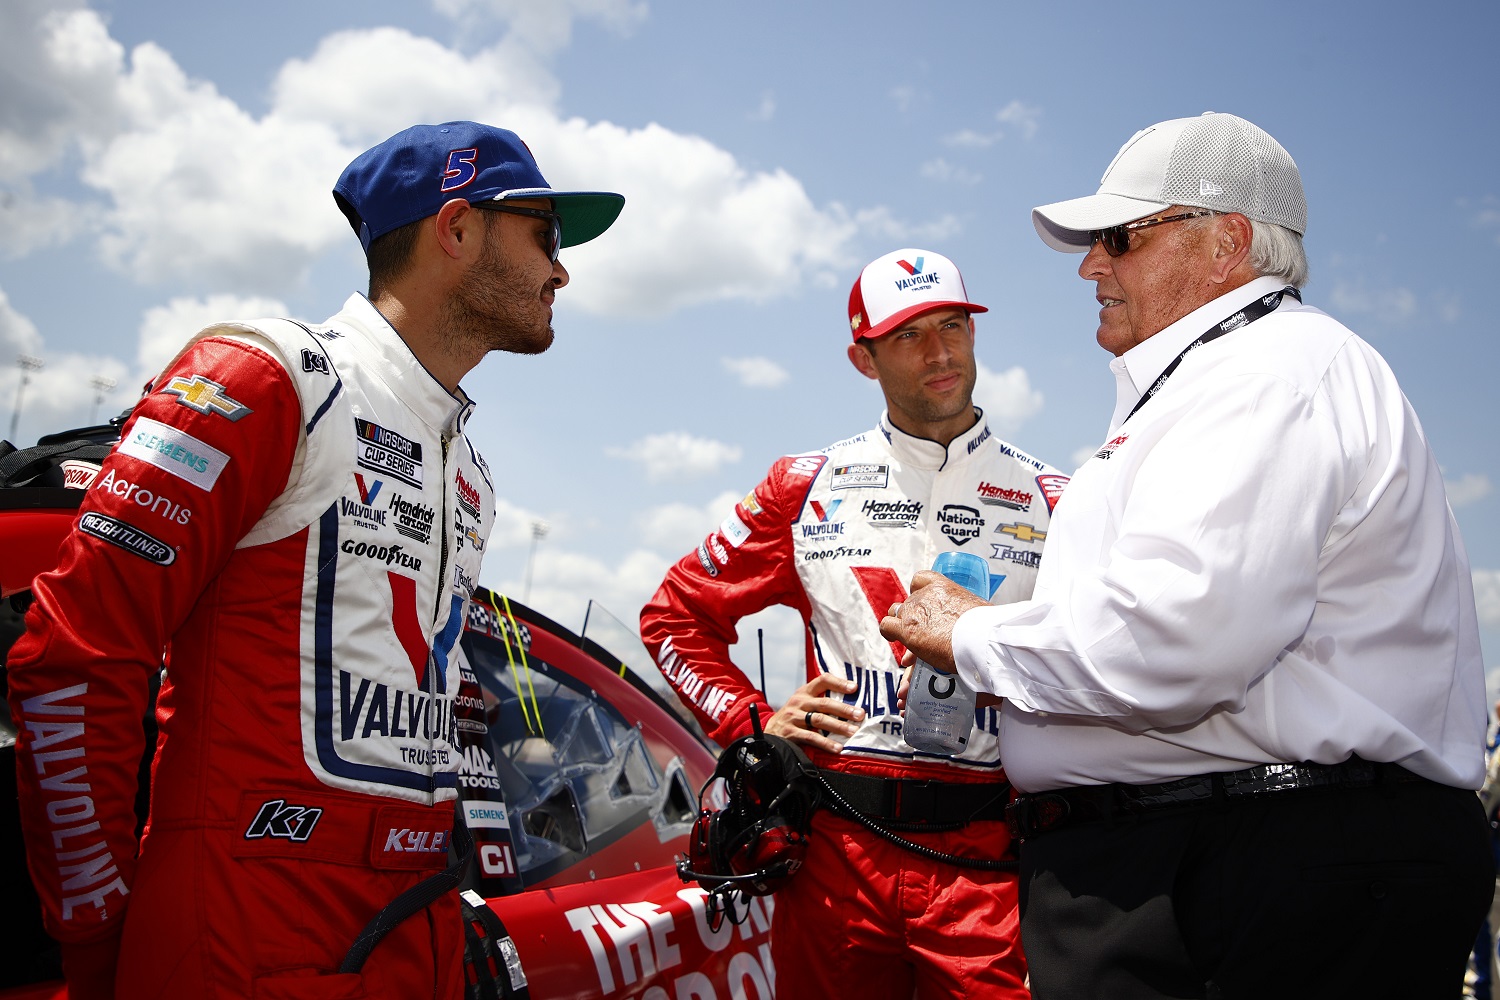 Kyle Larson, driver of the No. 5 Chevrolet, crew chief Cliff Daniels, and NASCAR Hall of Famer and team owner Rick Hendrick talk before the NASCAR Cup Series Ally 400 at Nashville Superspeedway on June 20, 2021.